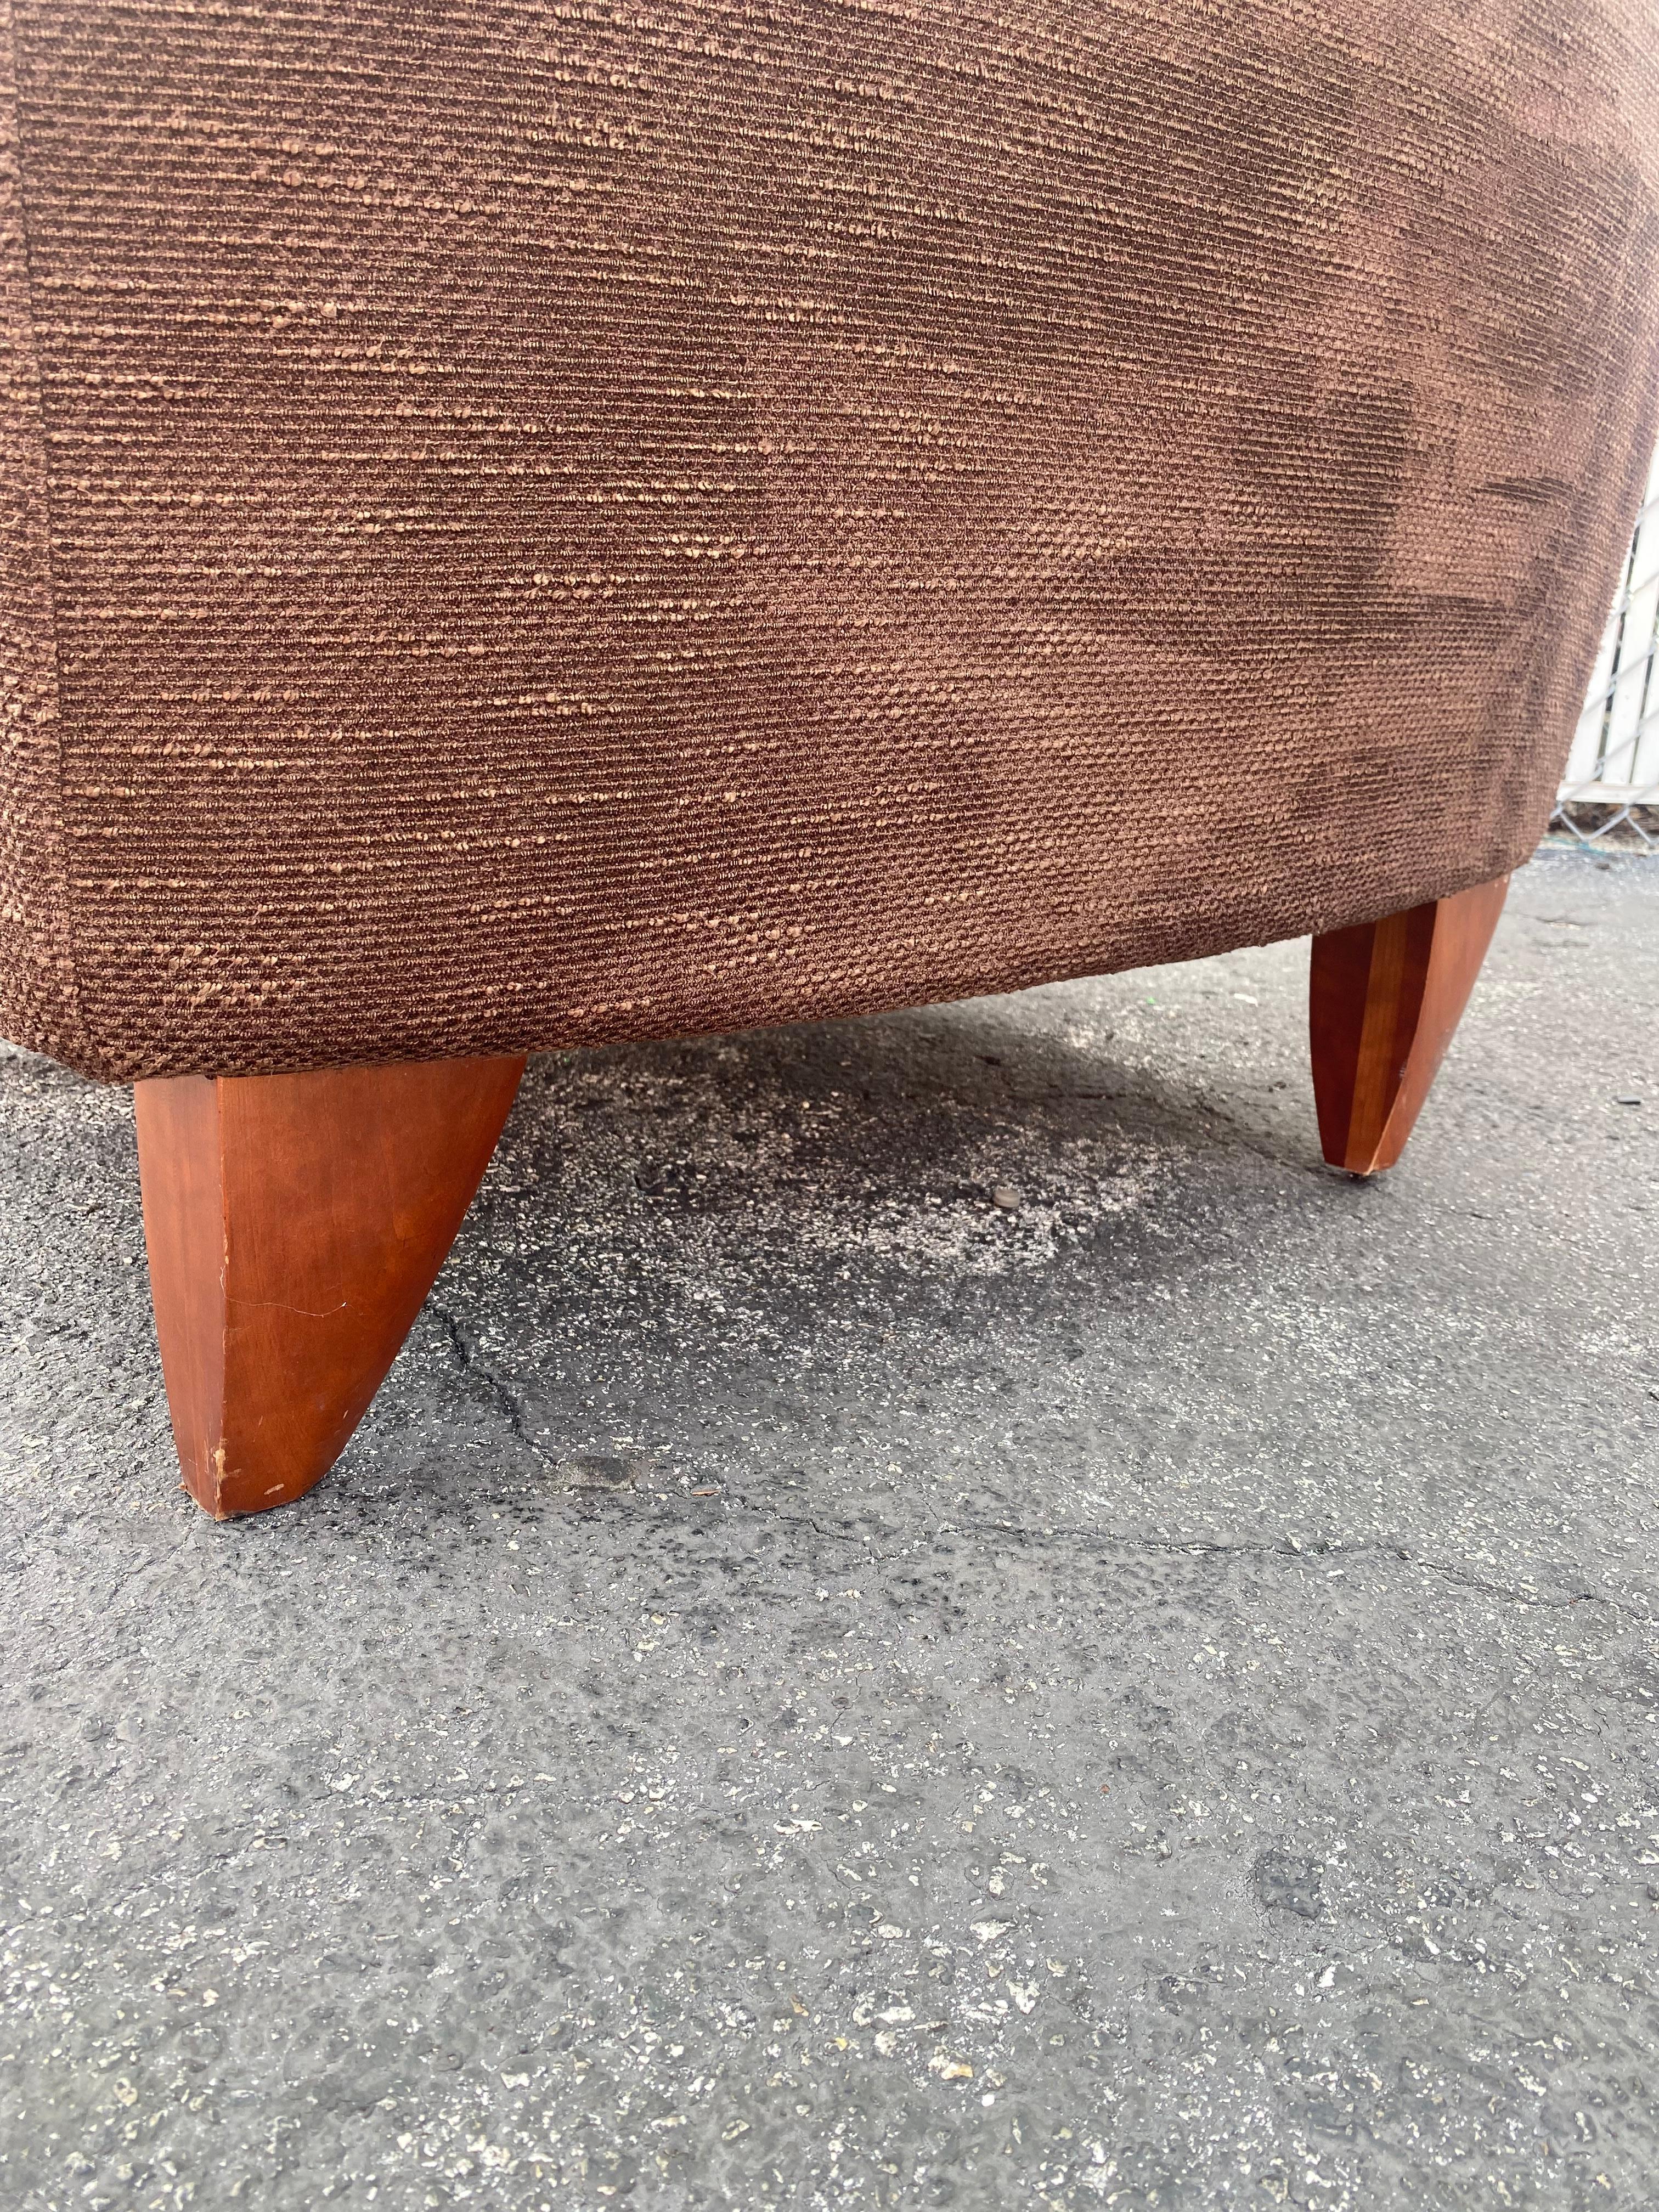 1970s Sculptural Art Deco Chenille Walnut Curved Chairs, Set of 2 For Sale 8